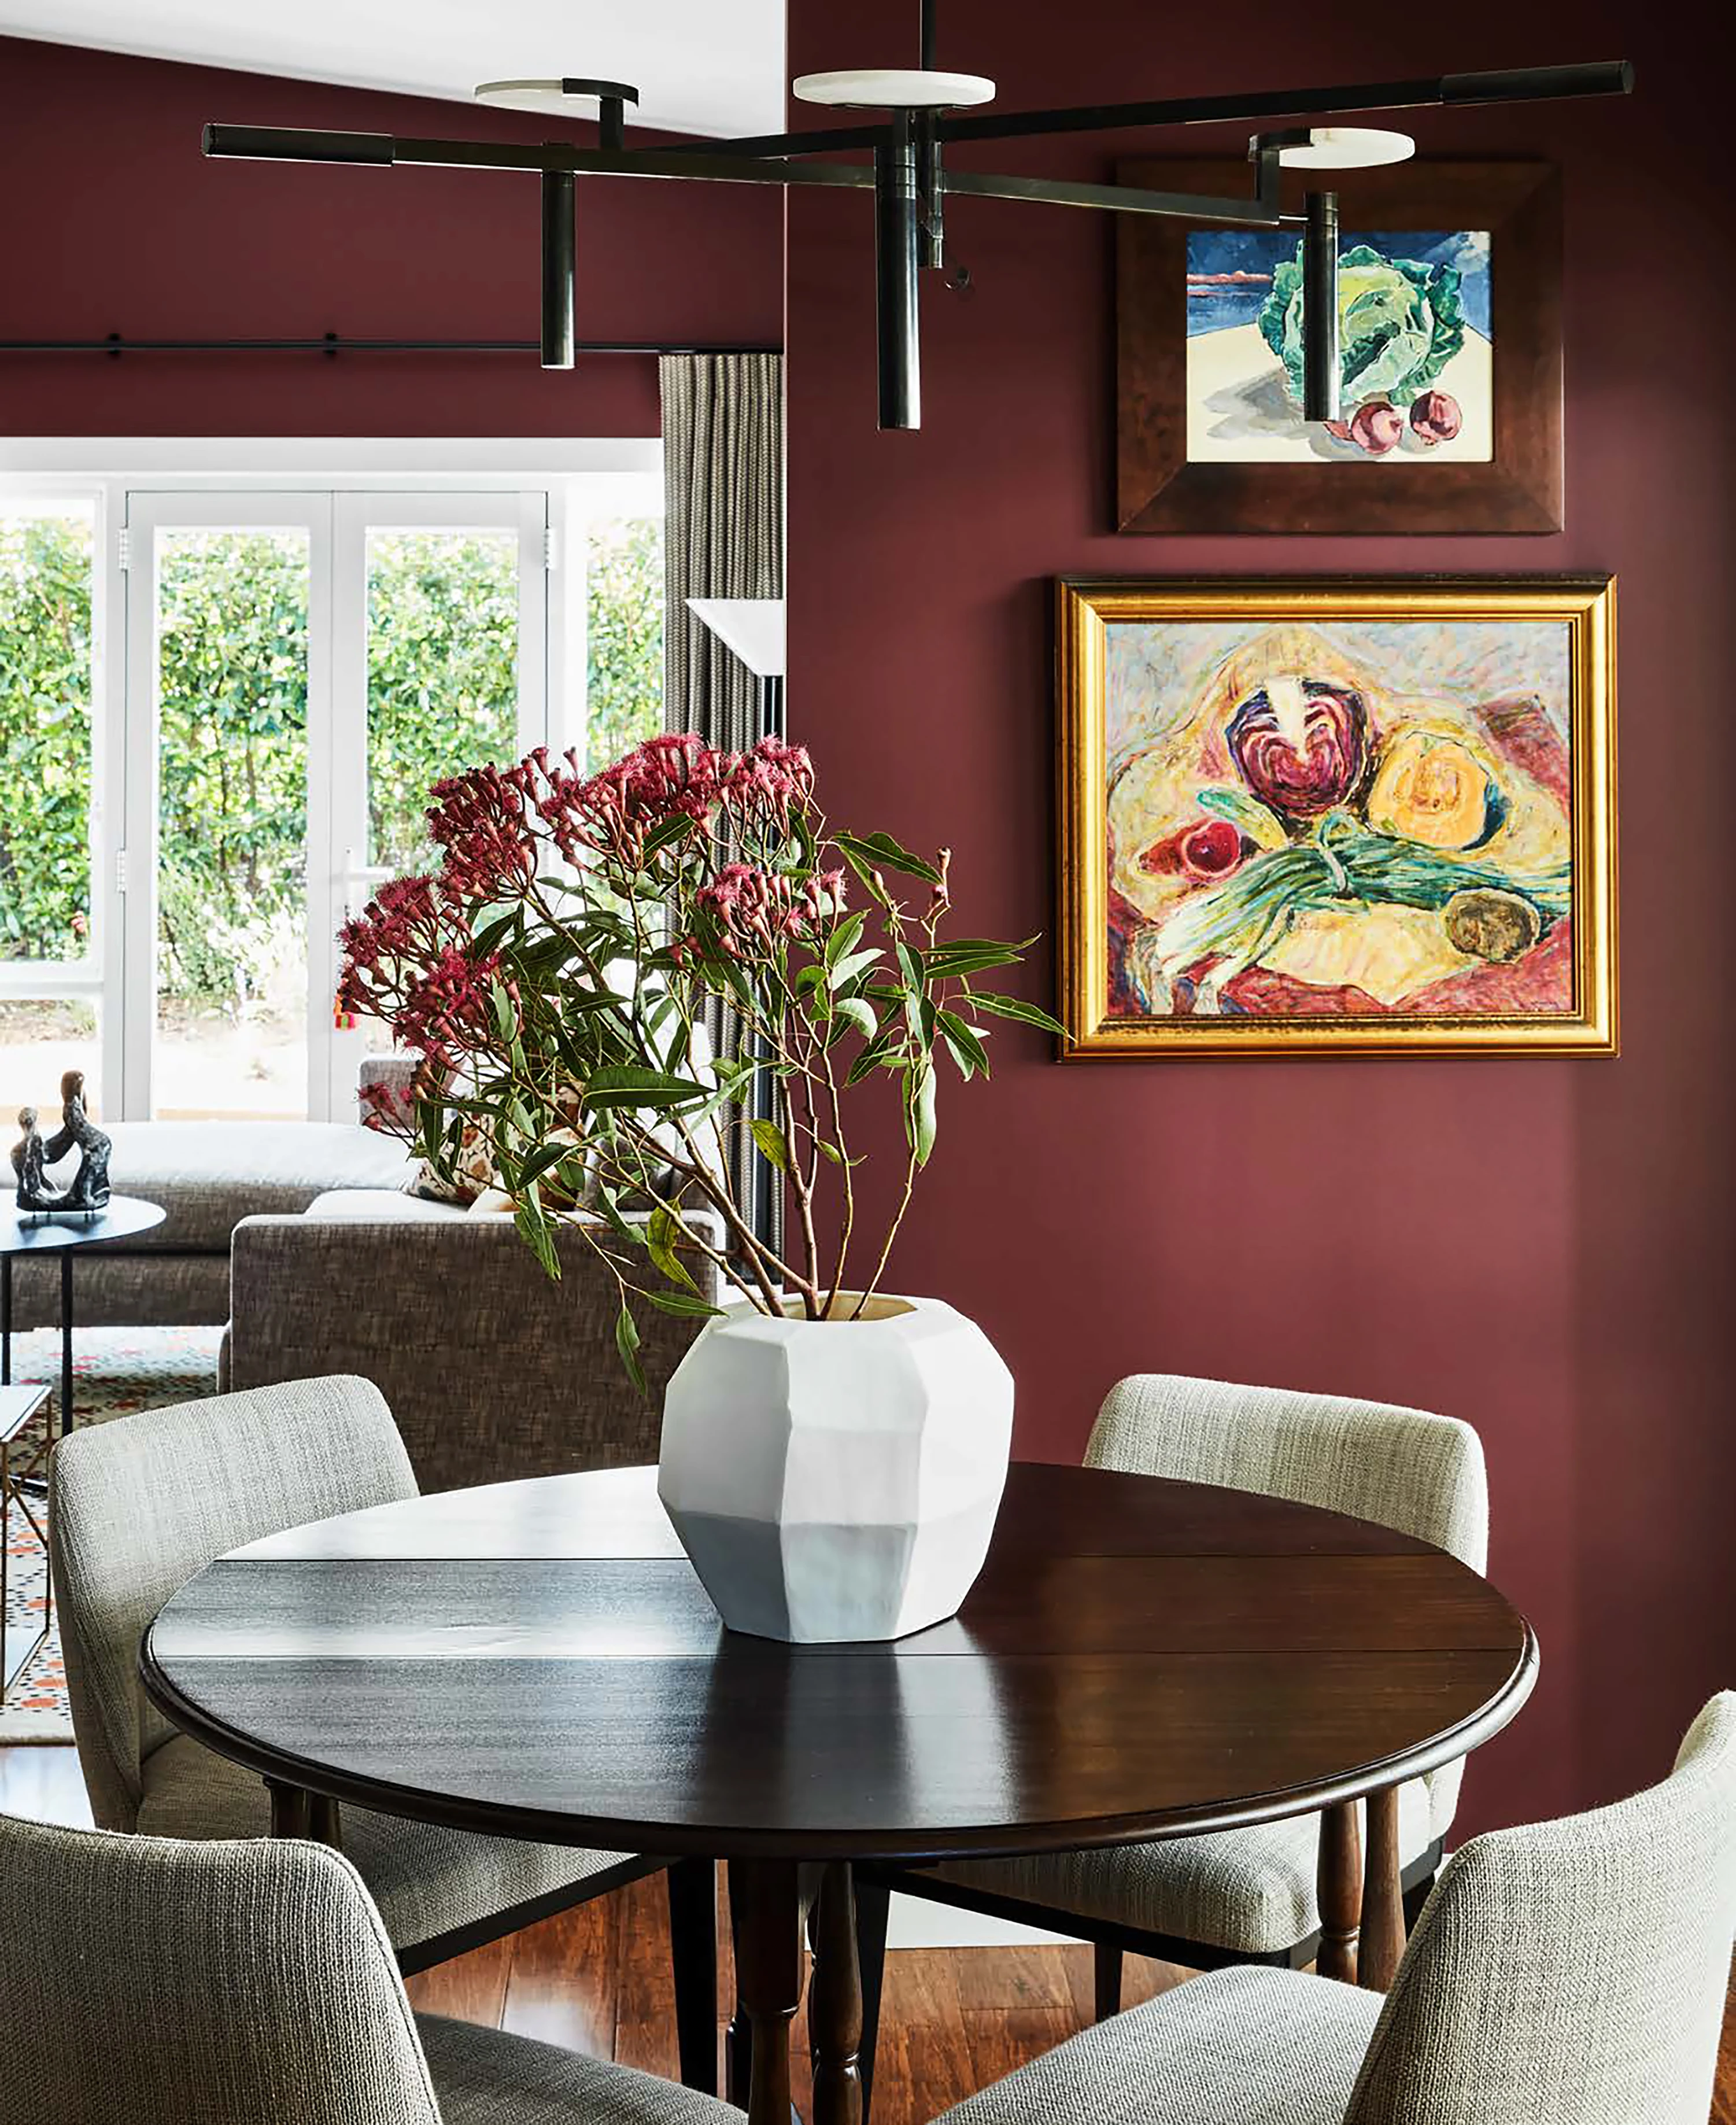 Dining toom with round table, four chairs, paintings, on maroon wall